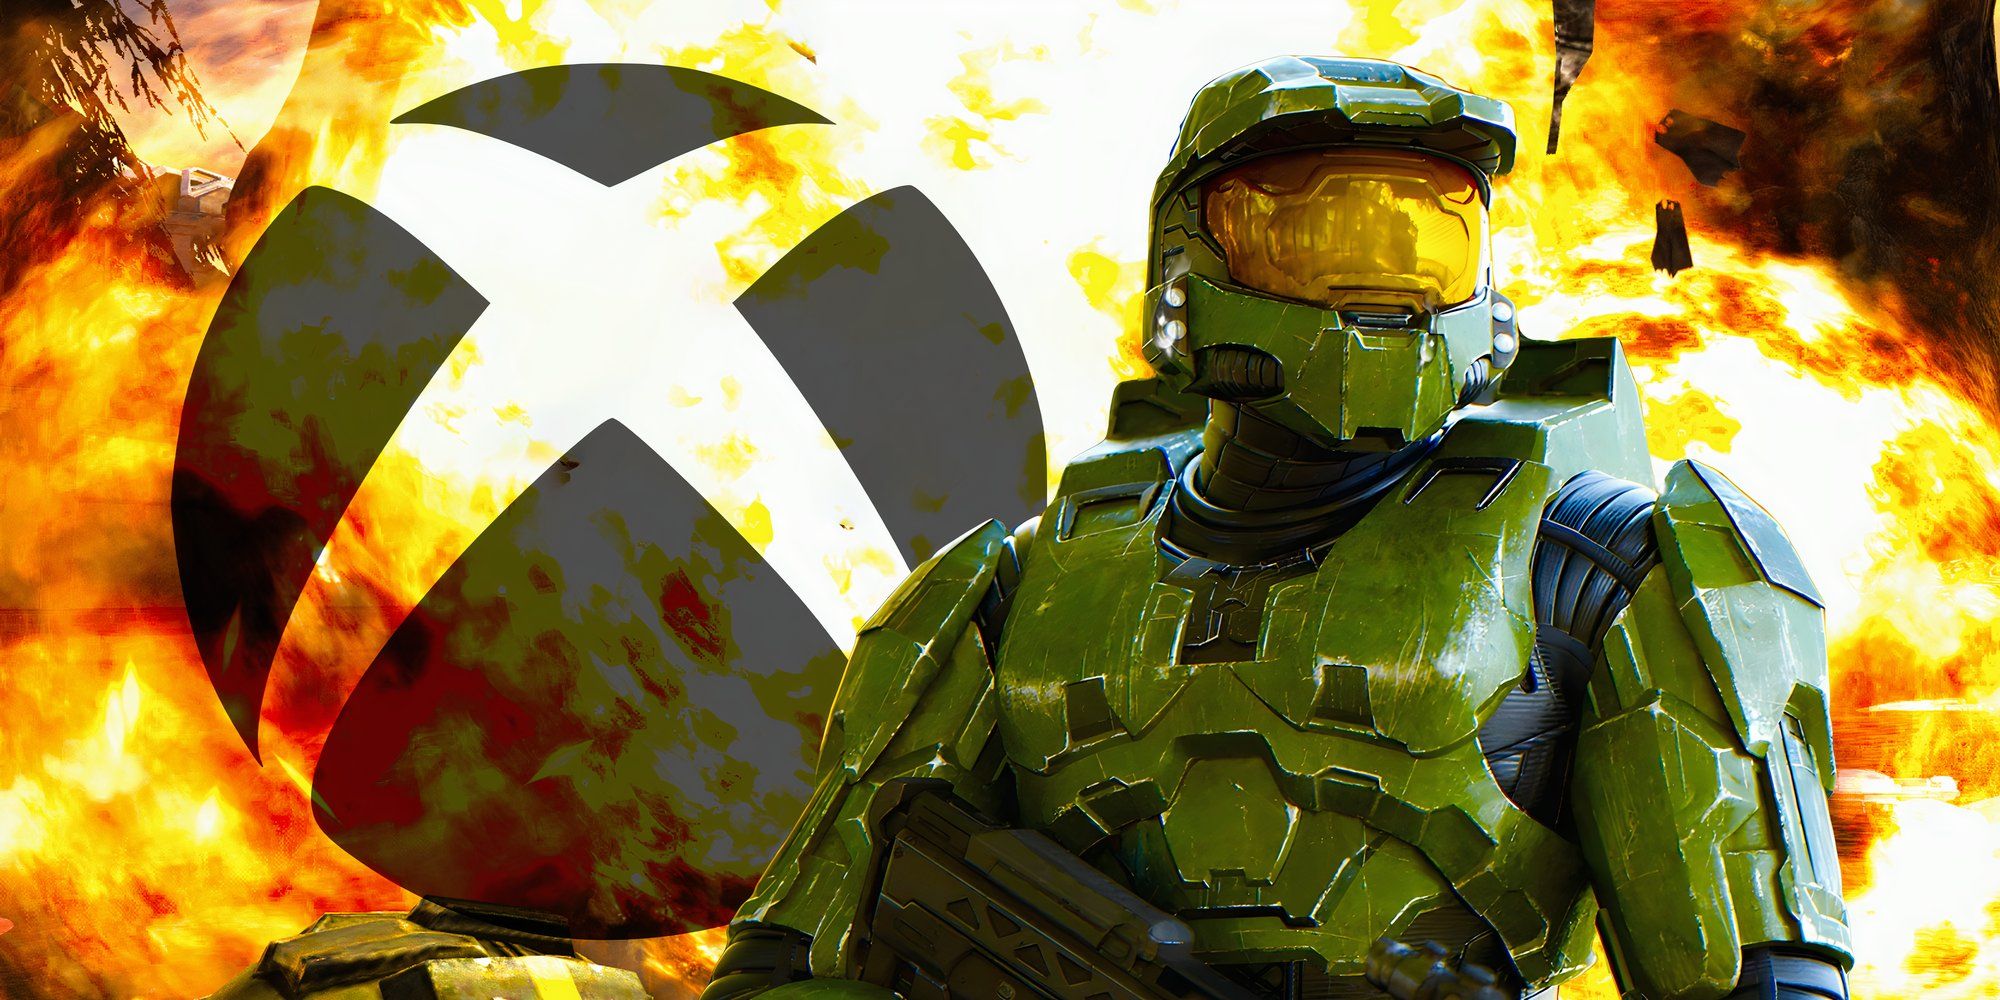 Halo Master Chief with a teardrop falling from his eye with the Xbox logo.